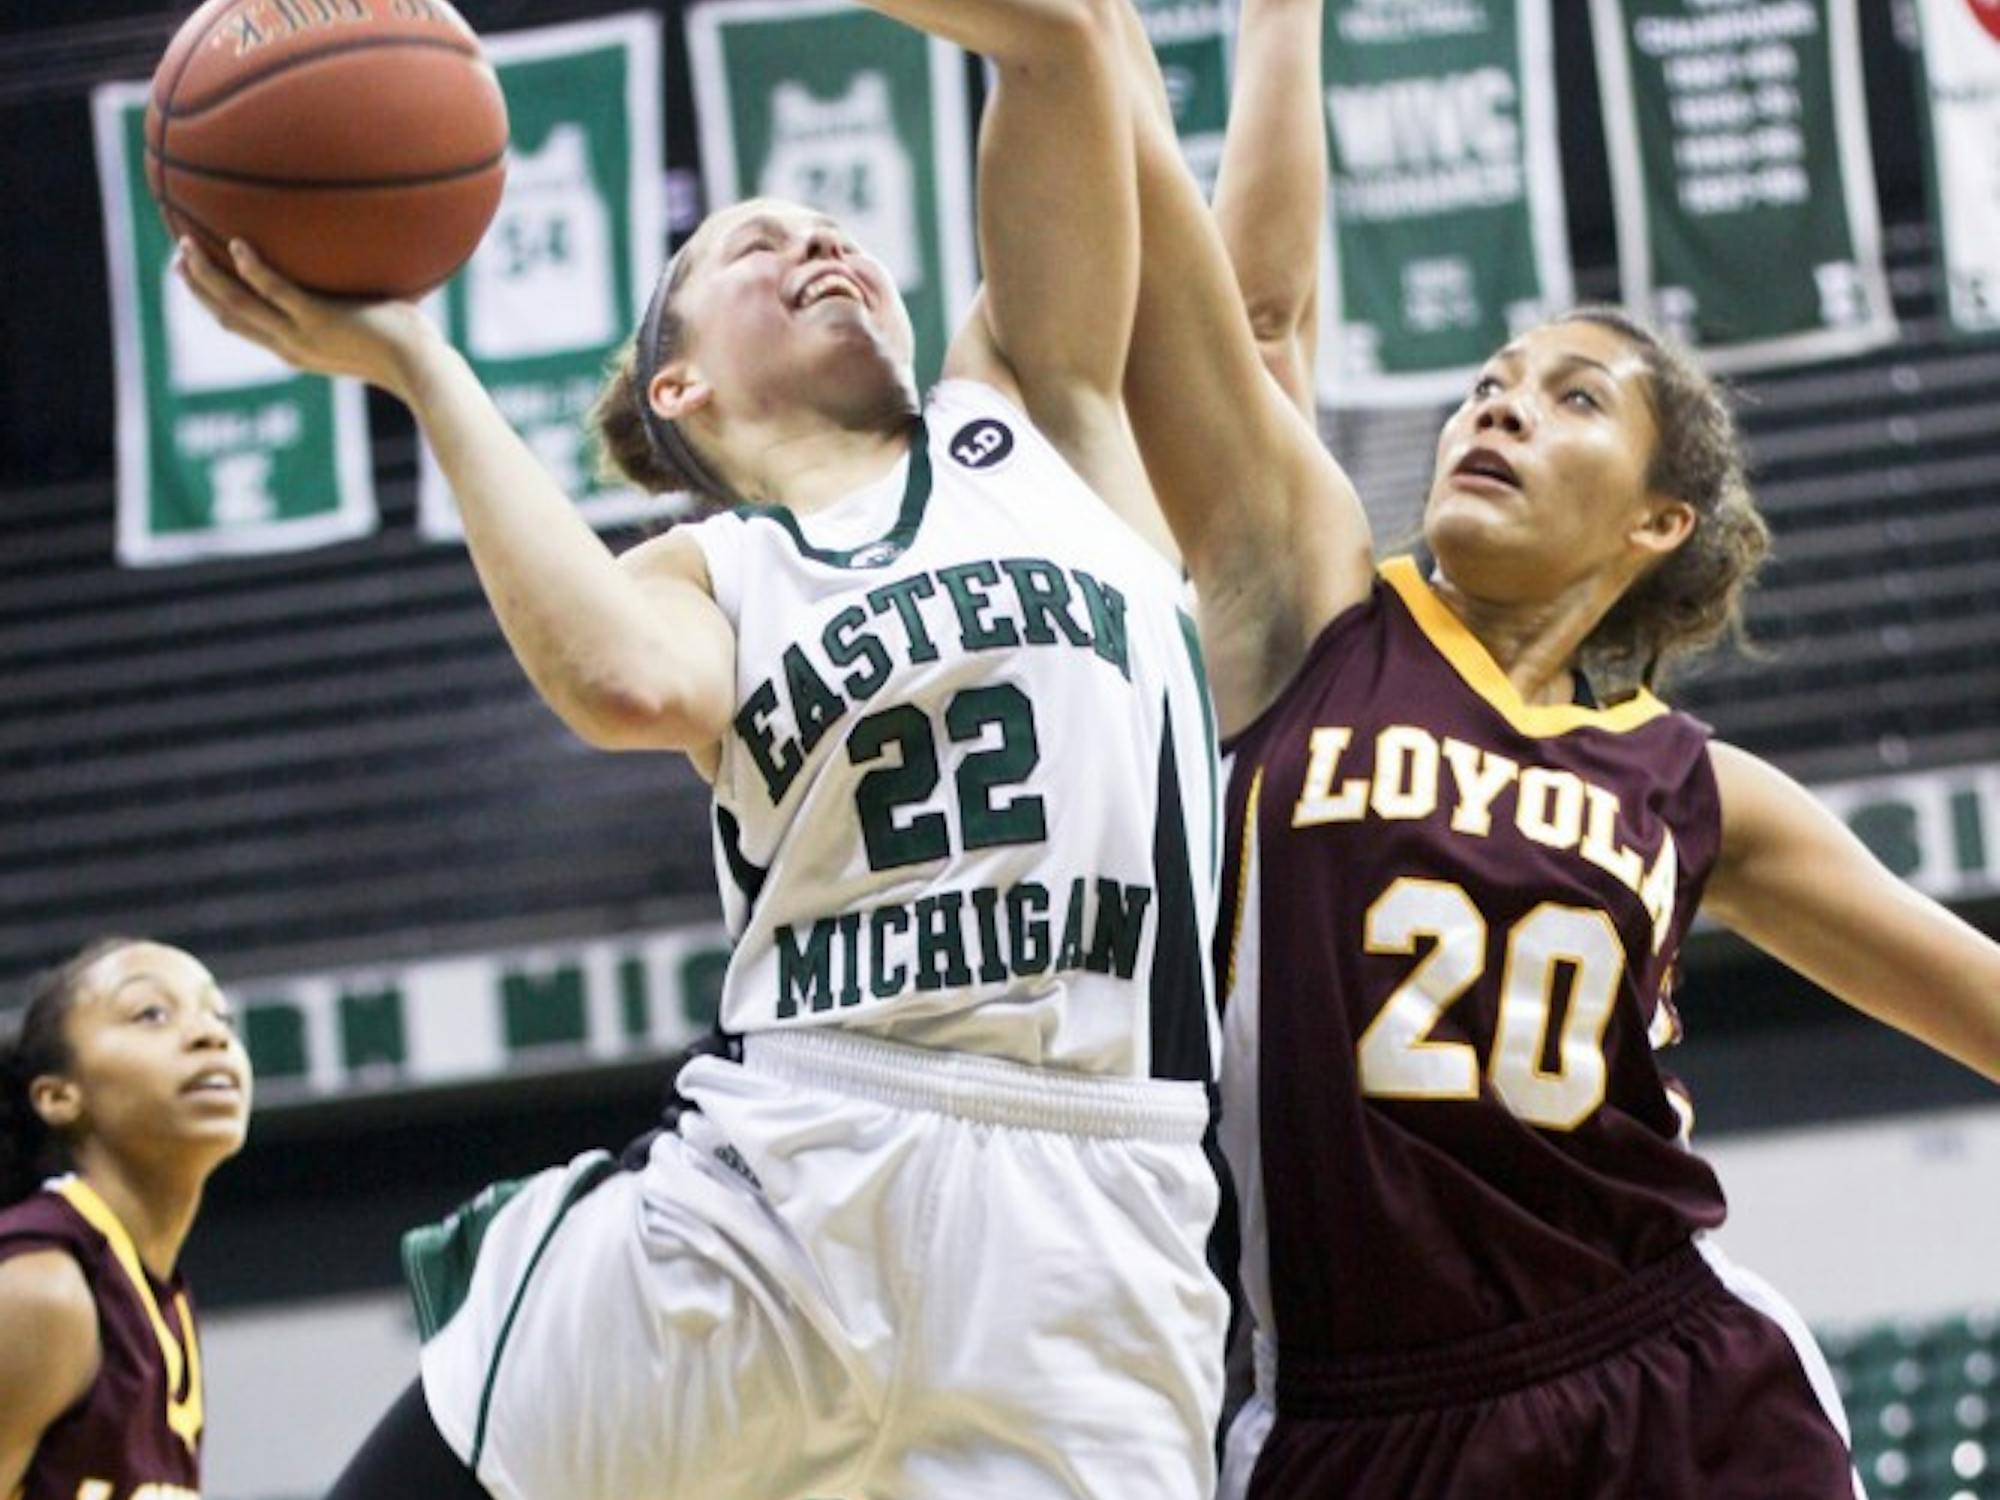 Senior guard Cassie Schrock (22) goes for a layup against Loyola’s Troy Hambric (20). Schrock was a leading scorer for the Eagles with 16 points. 